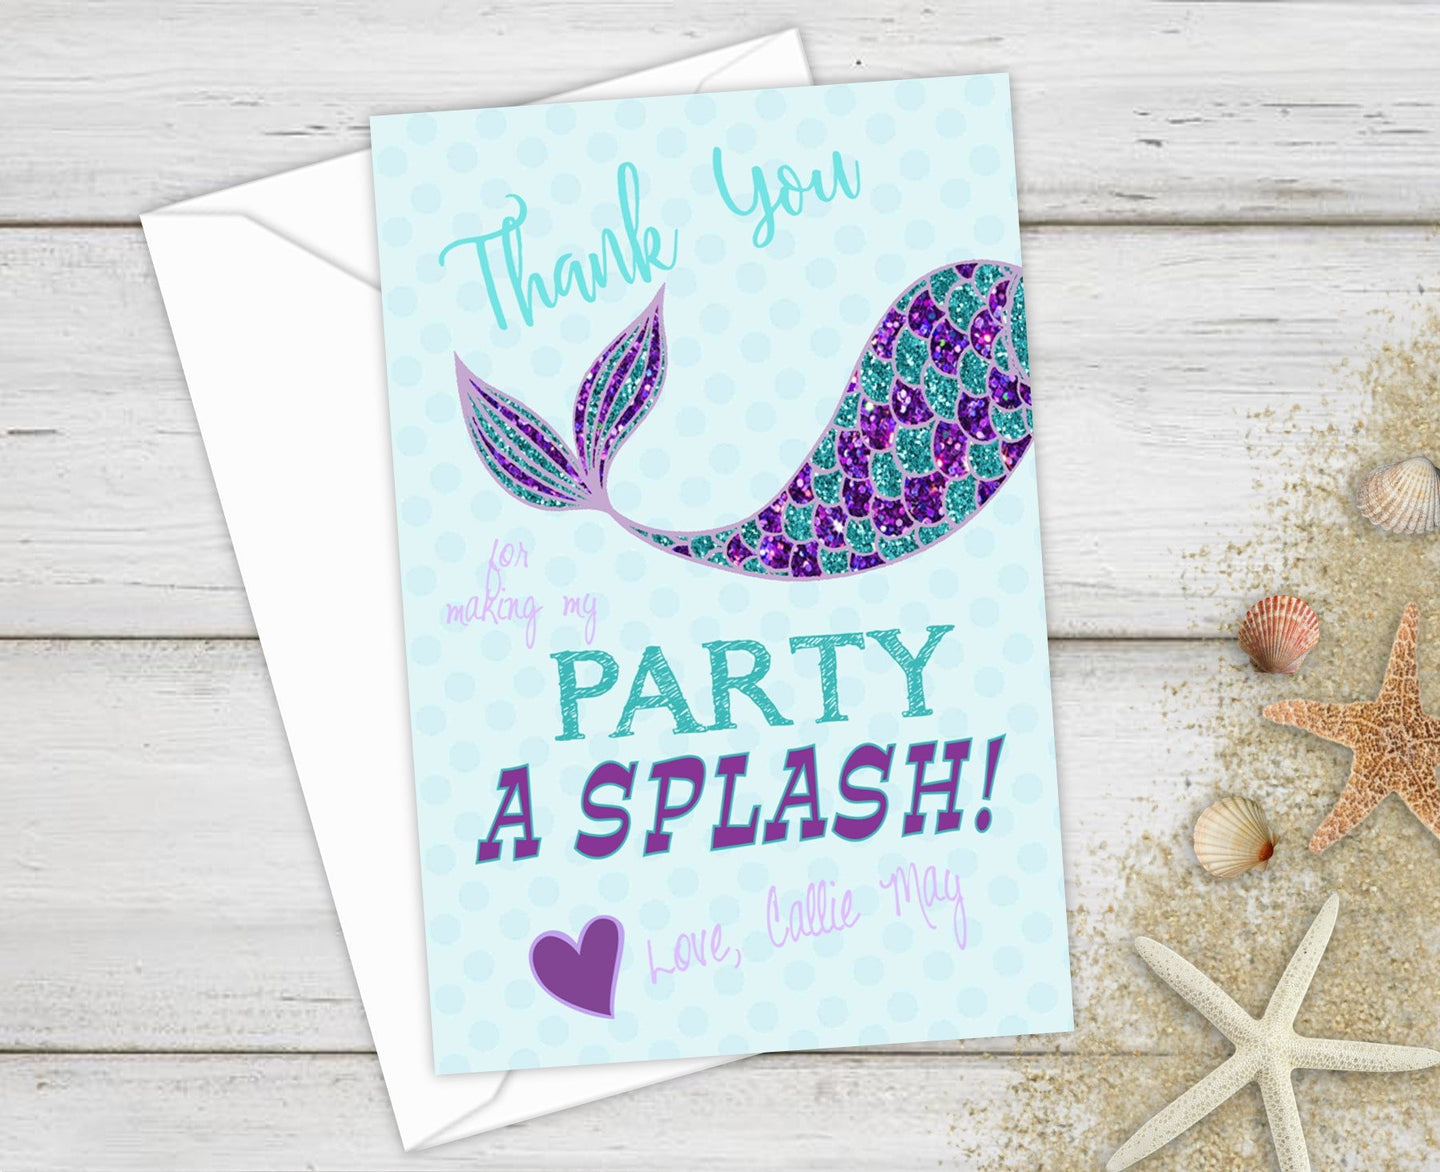 Mermaid Thank You Cards, Thank You Cards, Printable Thank You Card, Under the Sea, Birthday Thank You, Mermaid Party, Mermaid Birthday Party